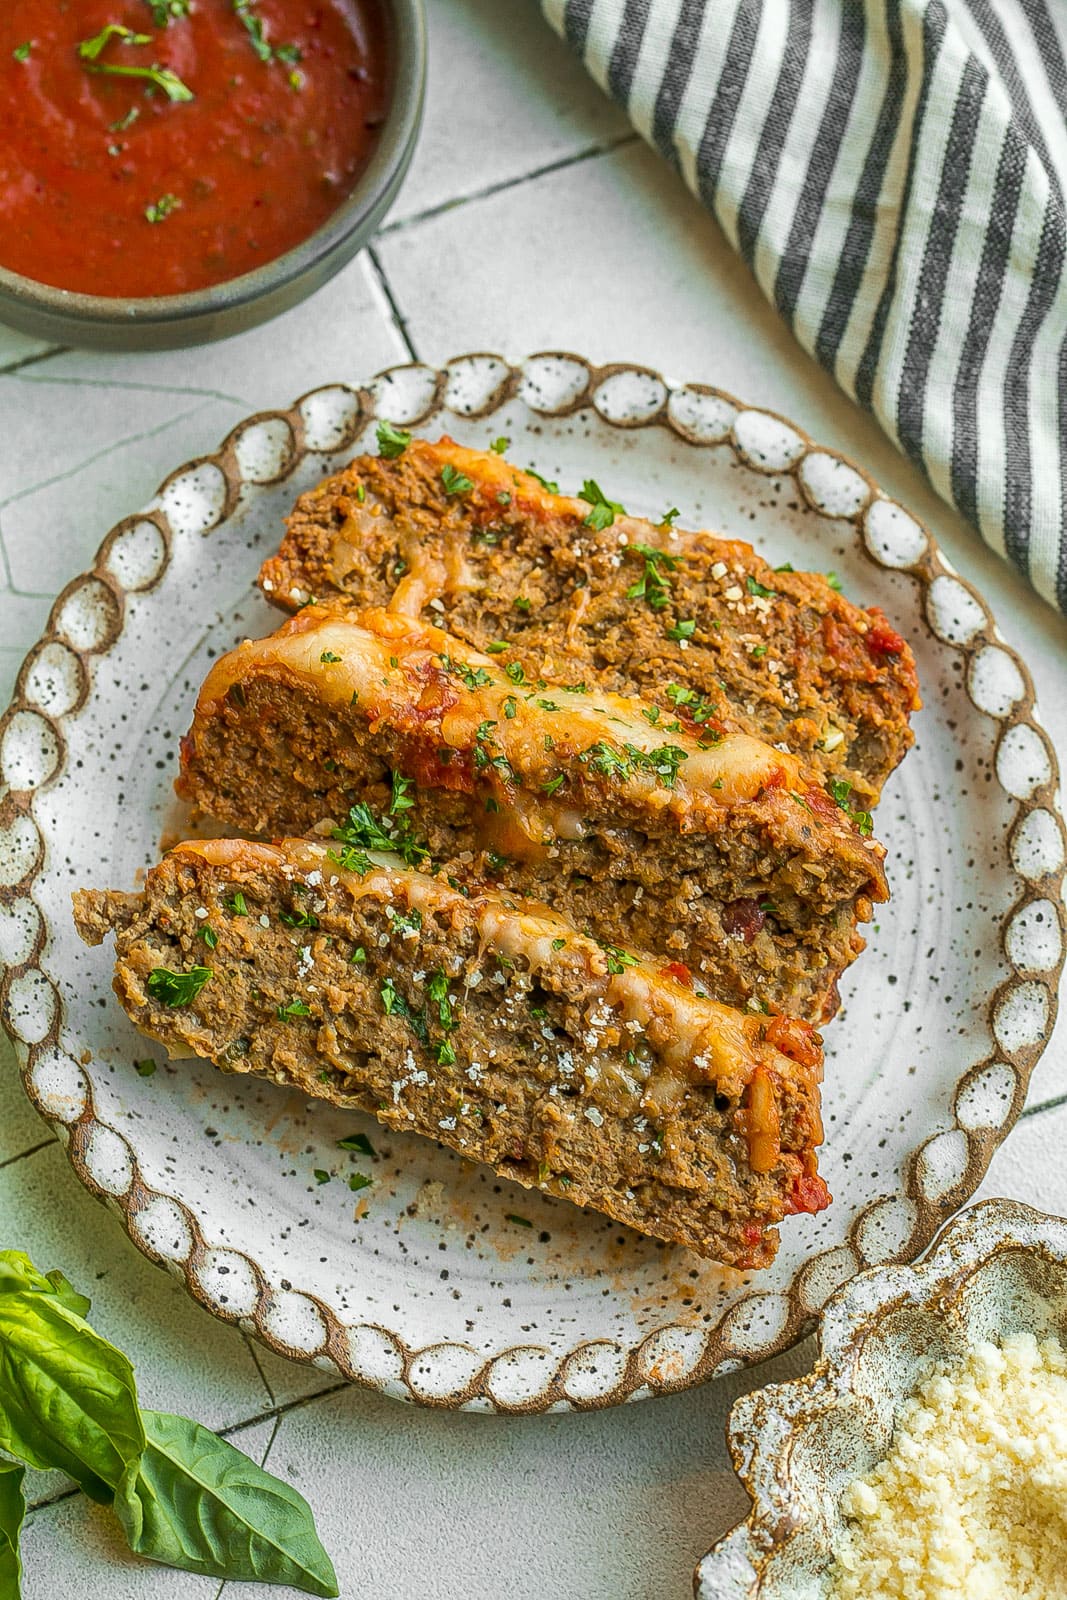 Italian meatloaf on a plate.